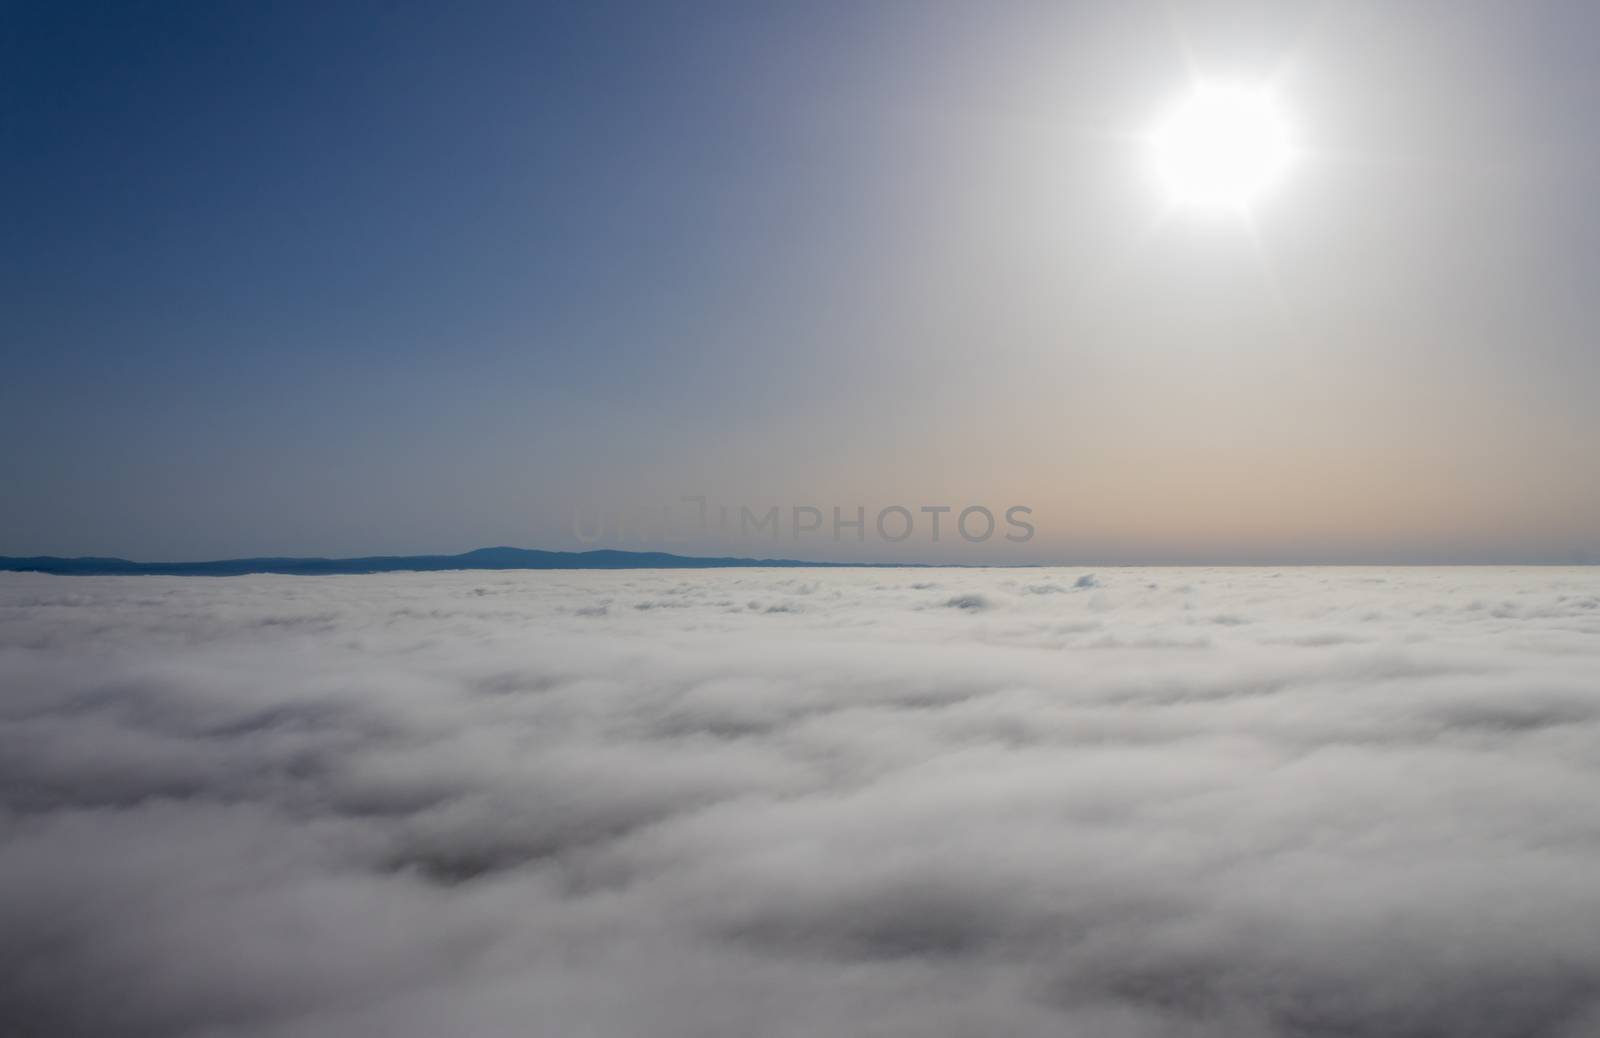 Hot air balloon in the Alentejo region, above the clouds. Portugal.